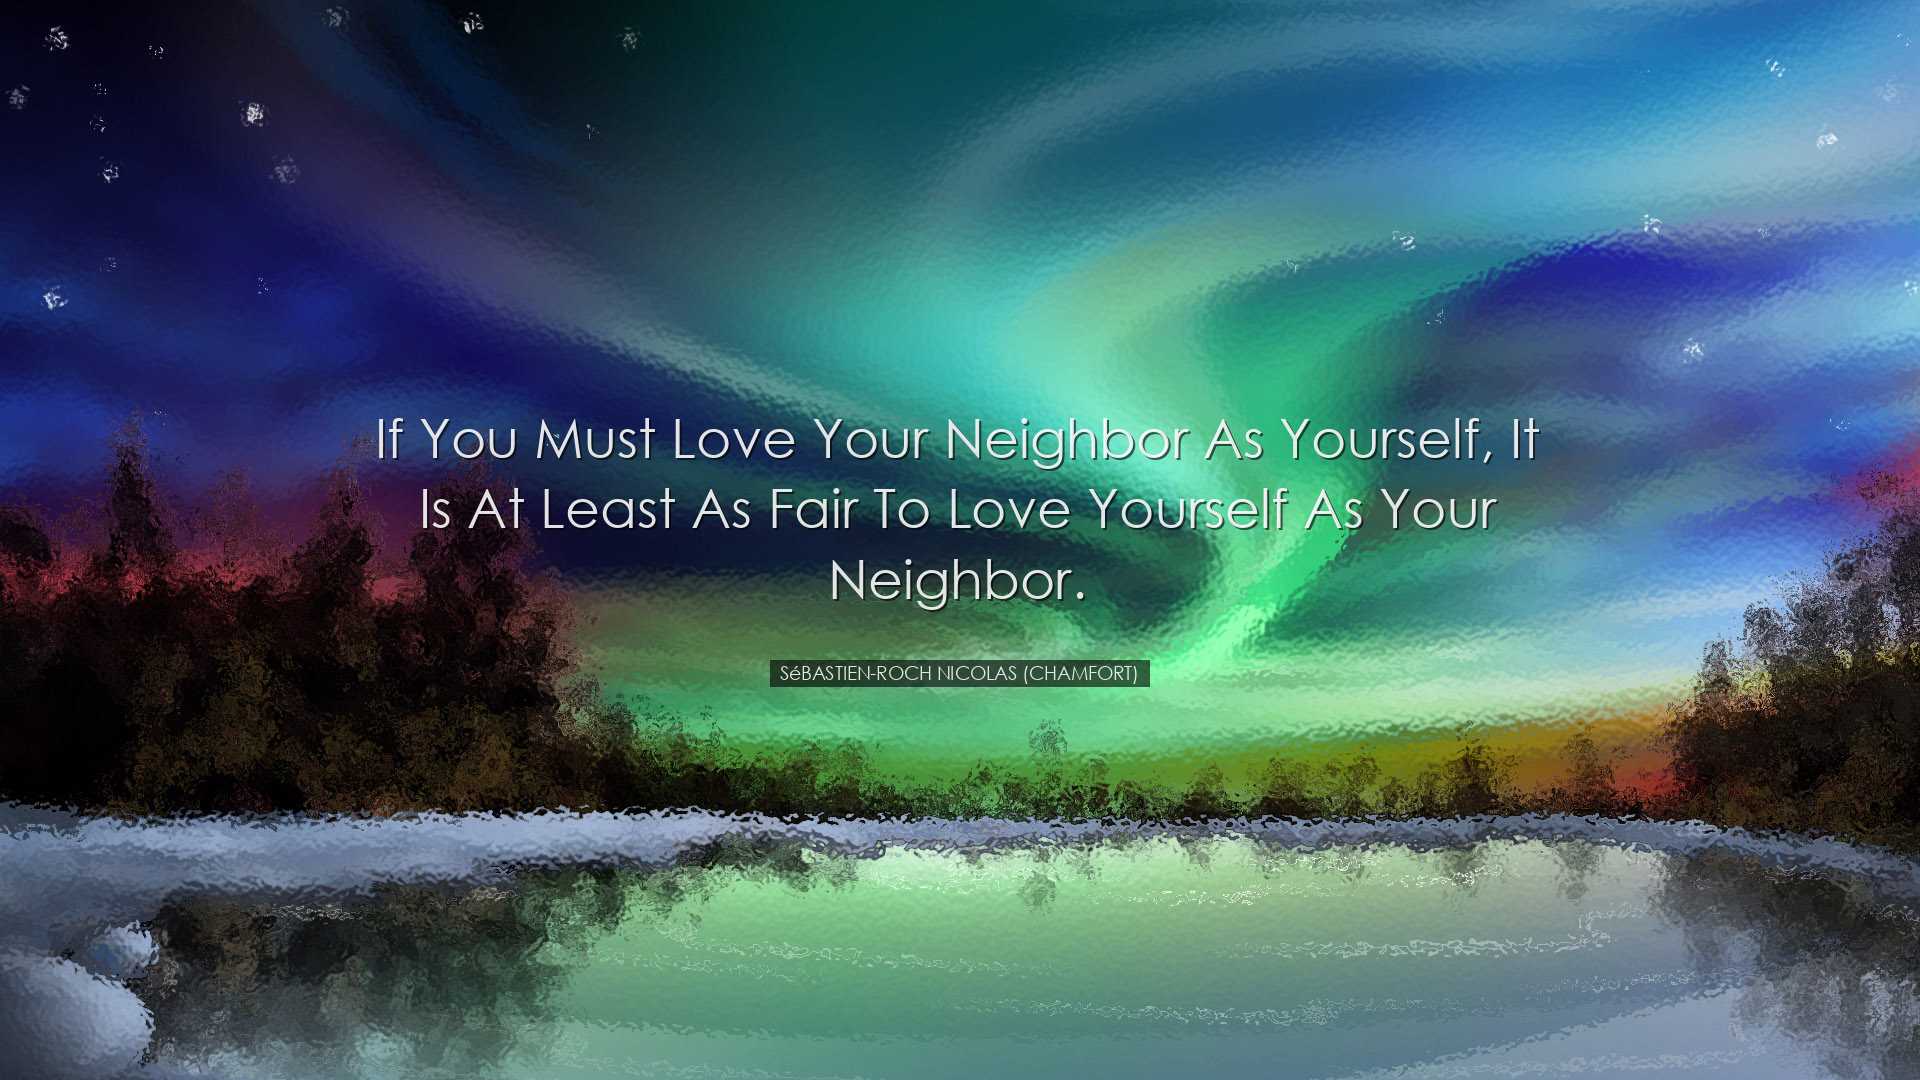 If you must love your neighbor as yourself, it is at least as fair